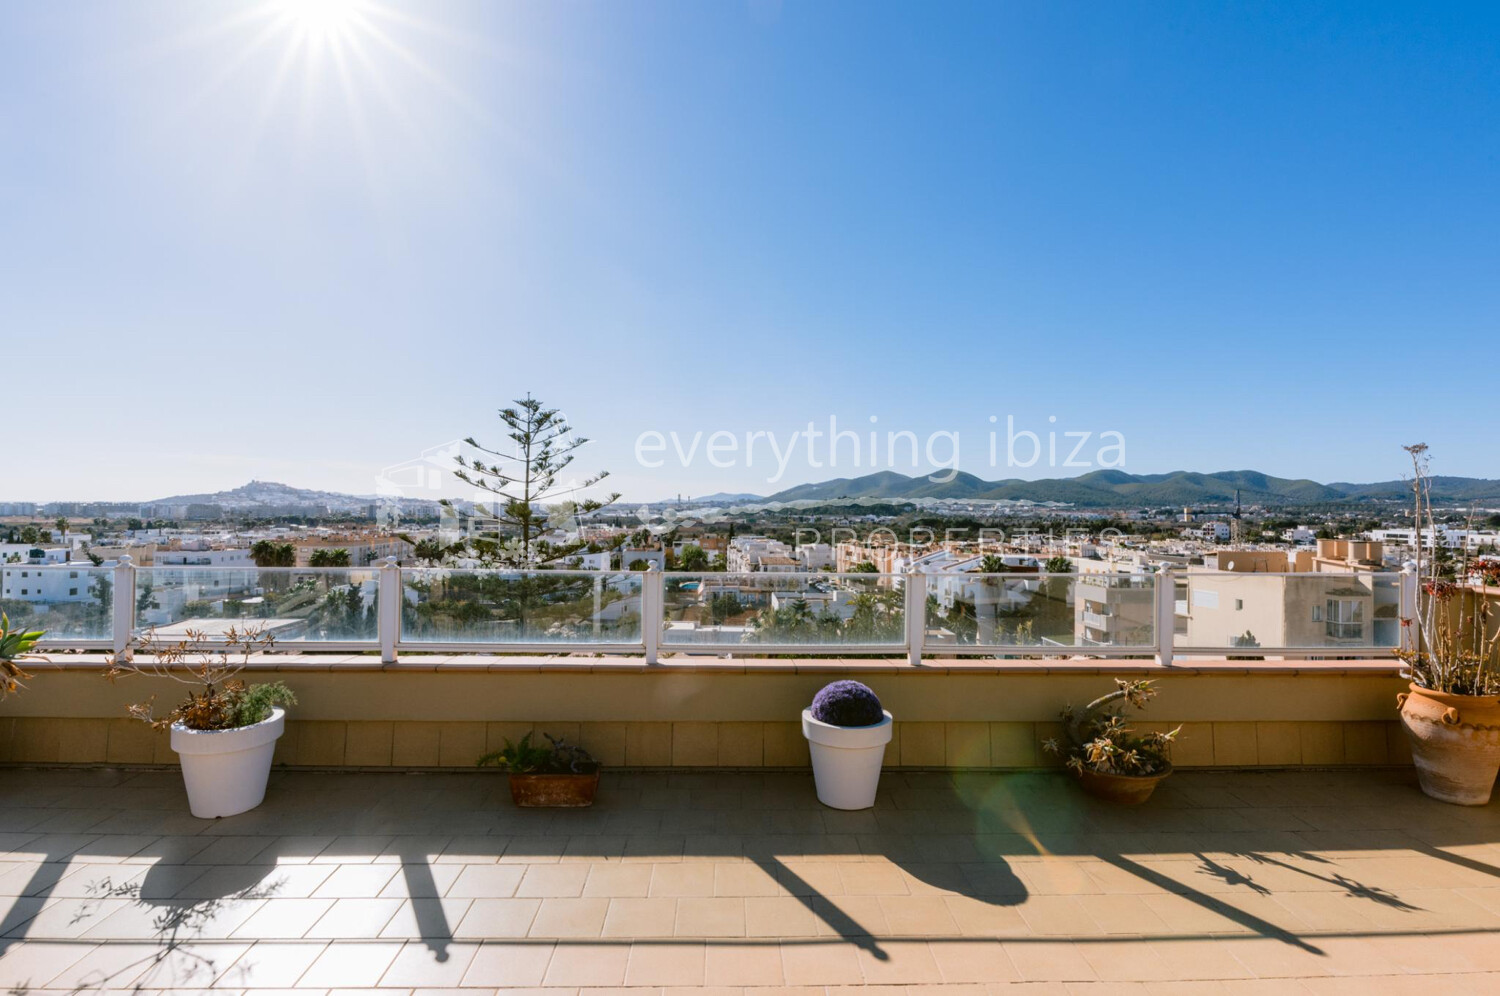 Charming Penthouse Apartment with Large Roof Terrace Overlooking Ibiza Town, ref. 1676, for sale in Ibiza by everything ibiza Properties